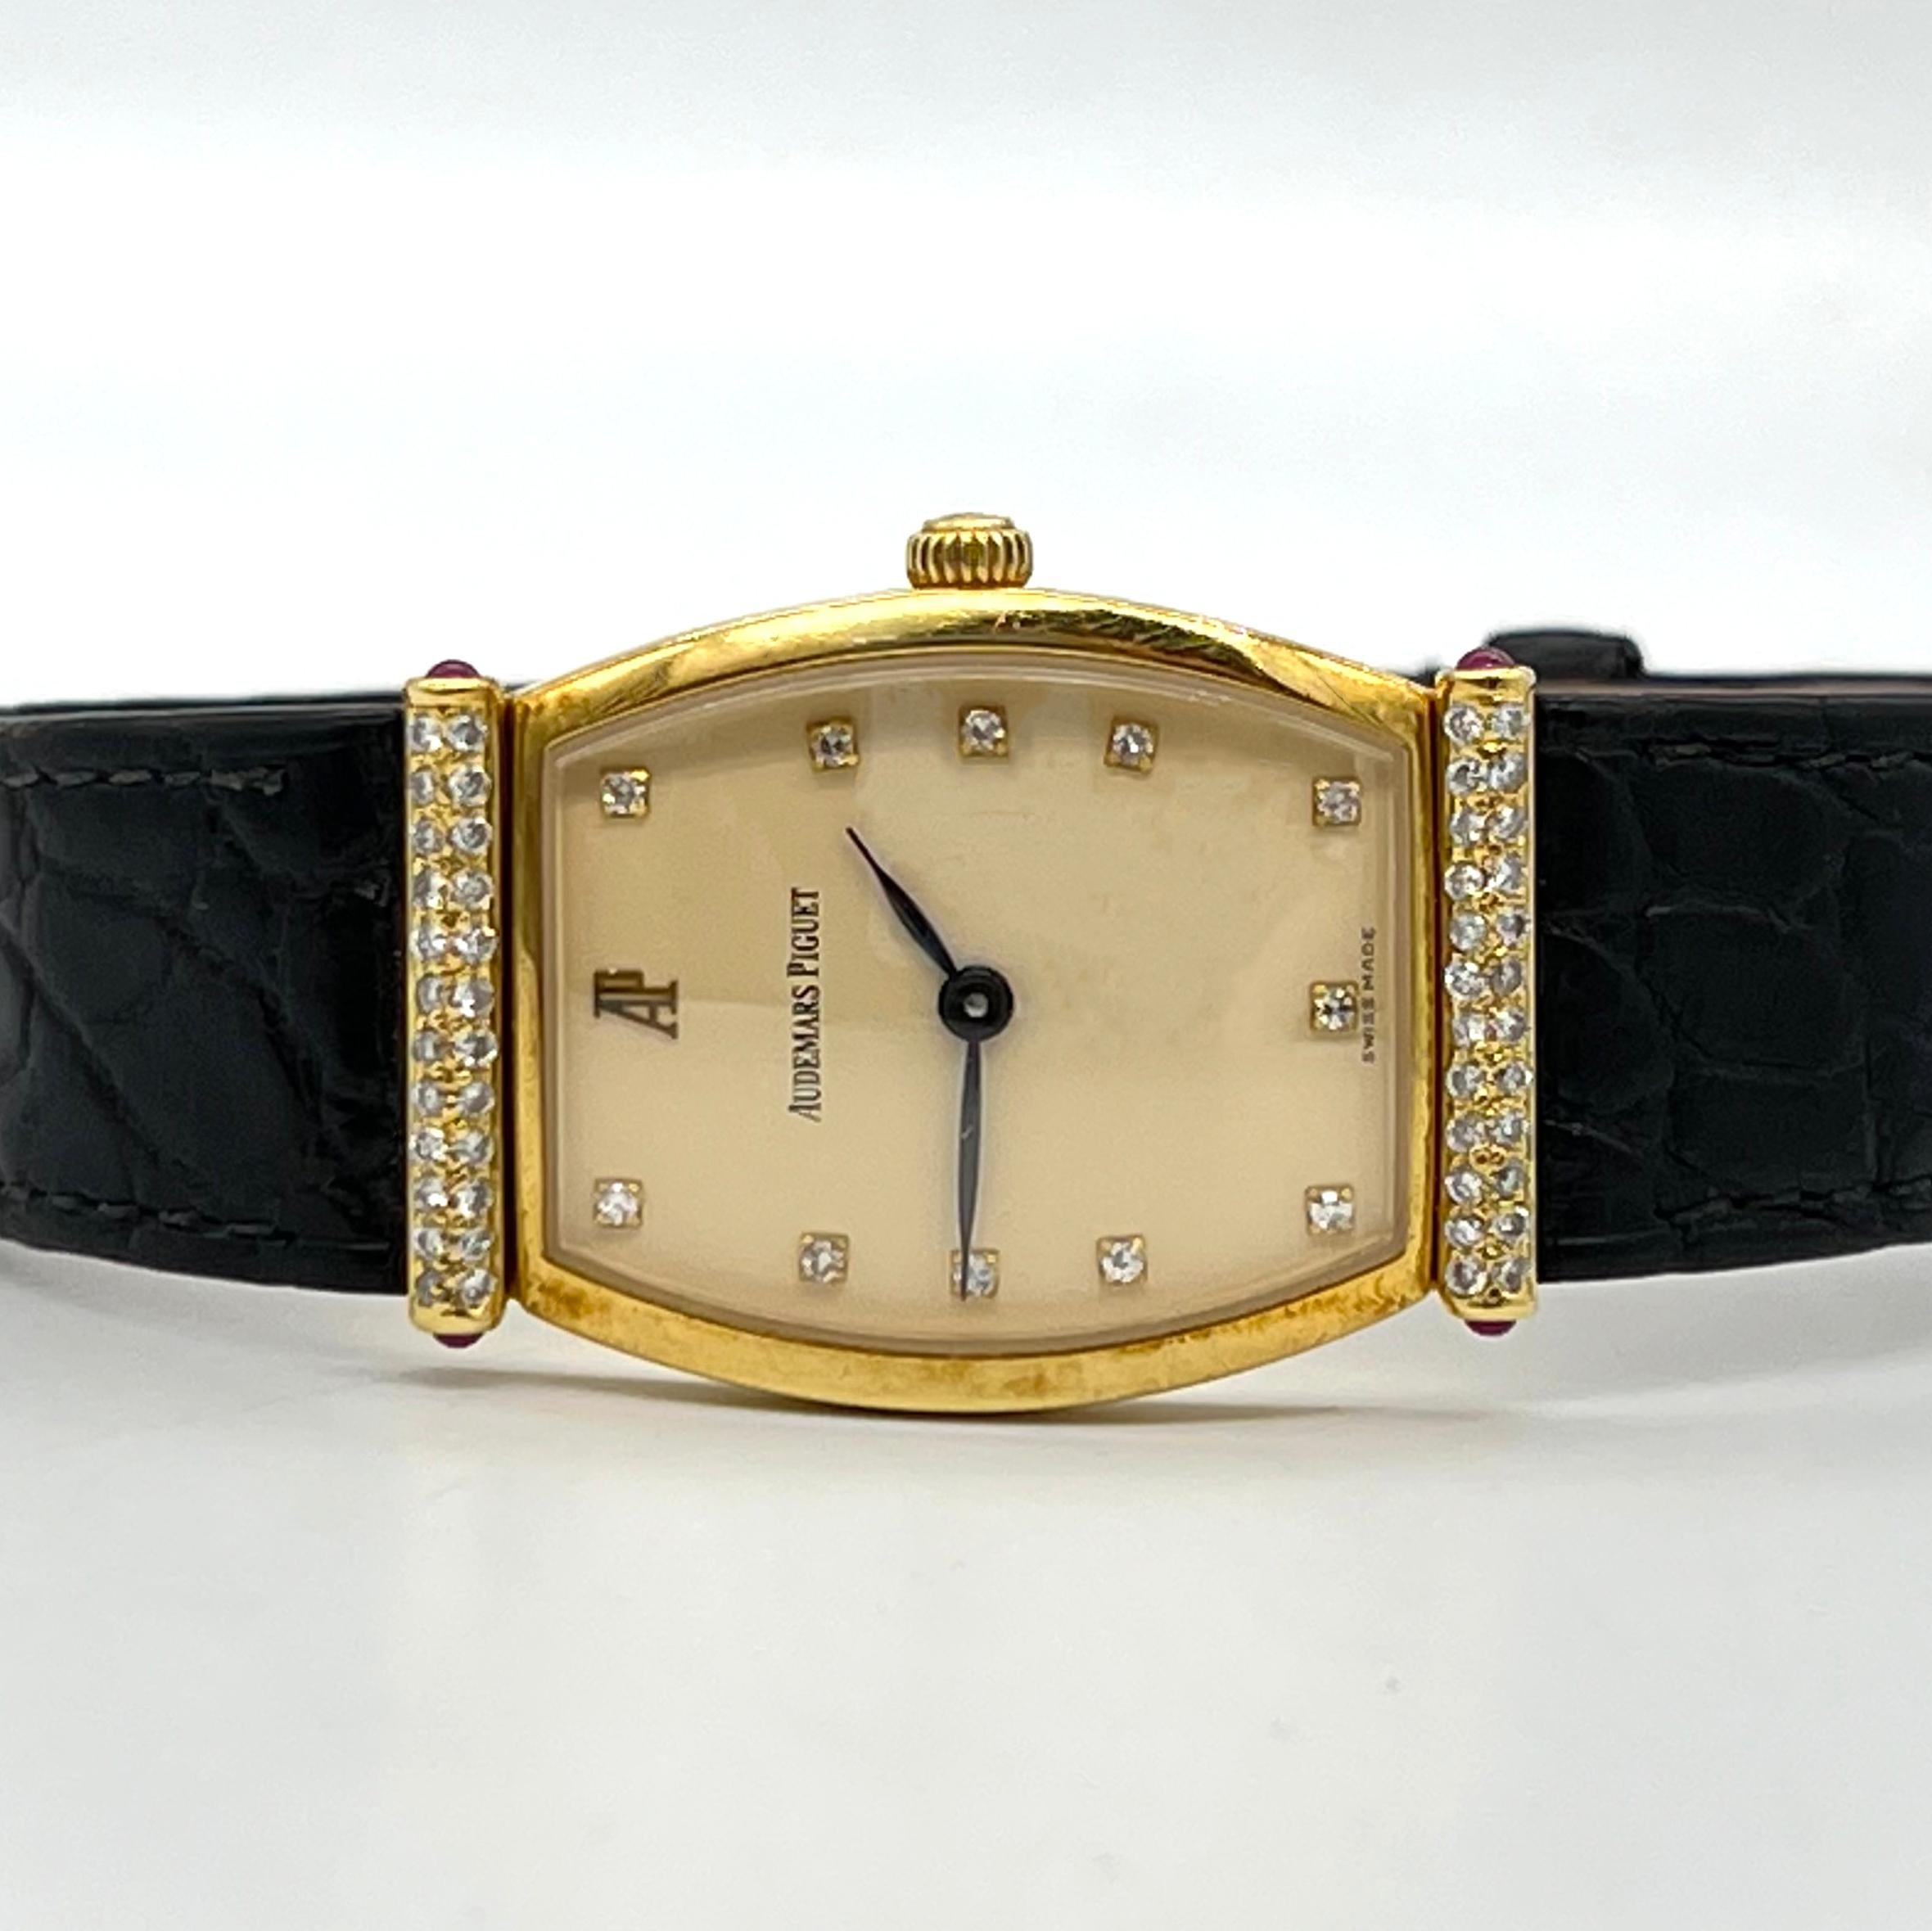 Authenticity Guarantee, Audemars Piguet Carnegie classic ladies watch in 18K yellow gold, 16cm diamond bezel. Reference number: 14941. This watch has a folding butterfly clasp. Quartz Operated movement with a brand new battery installed. A classic